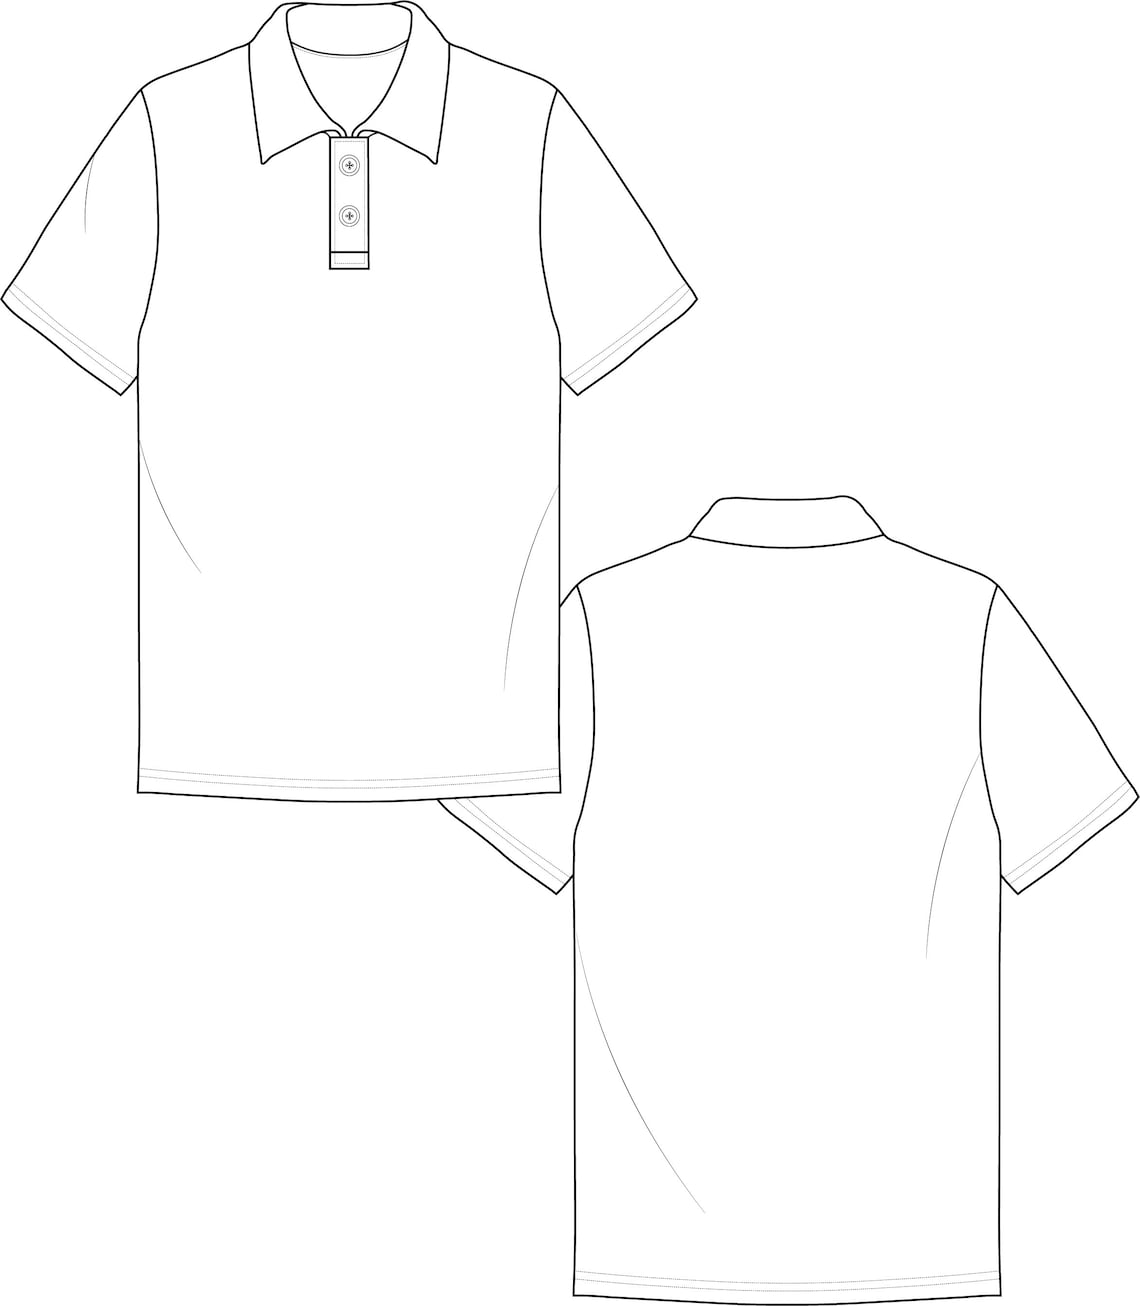 Polo Shirt Fashion Flat Technical Drawing Download - Etsy